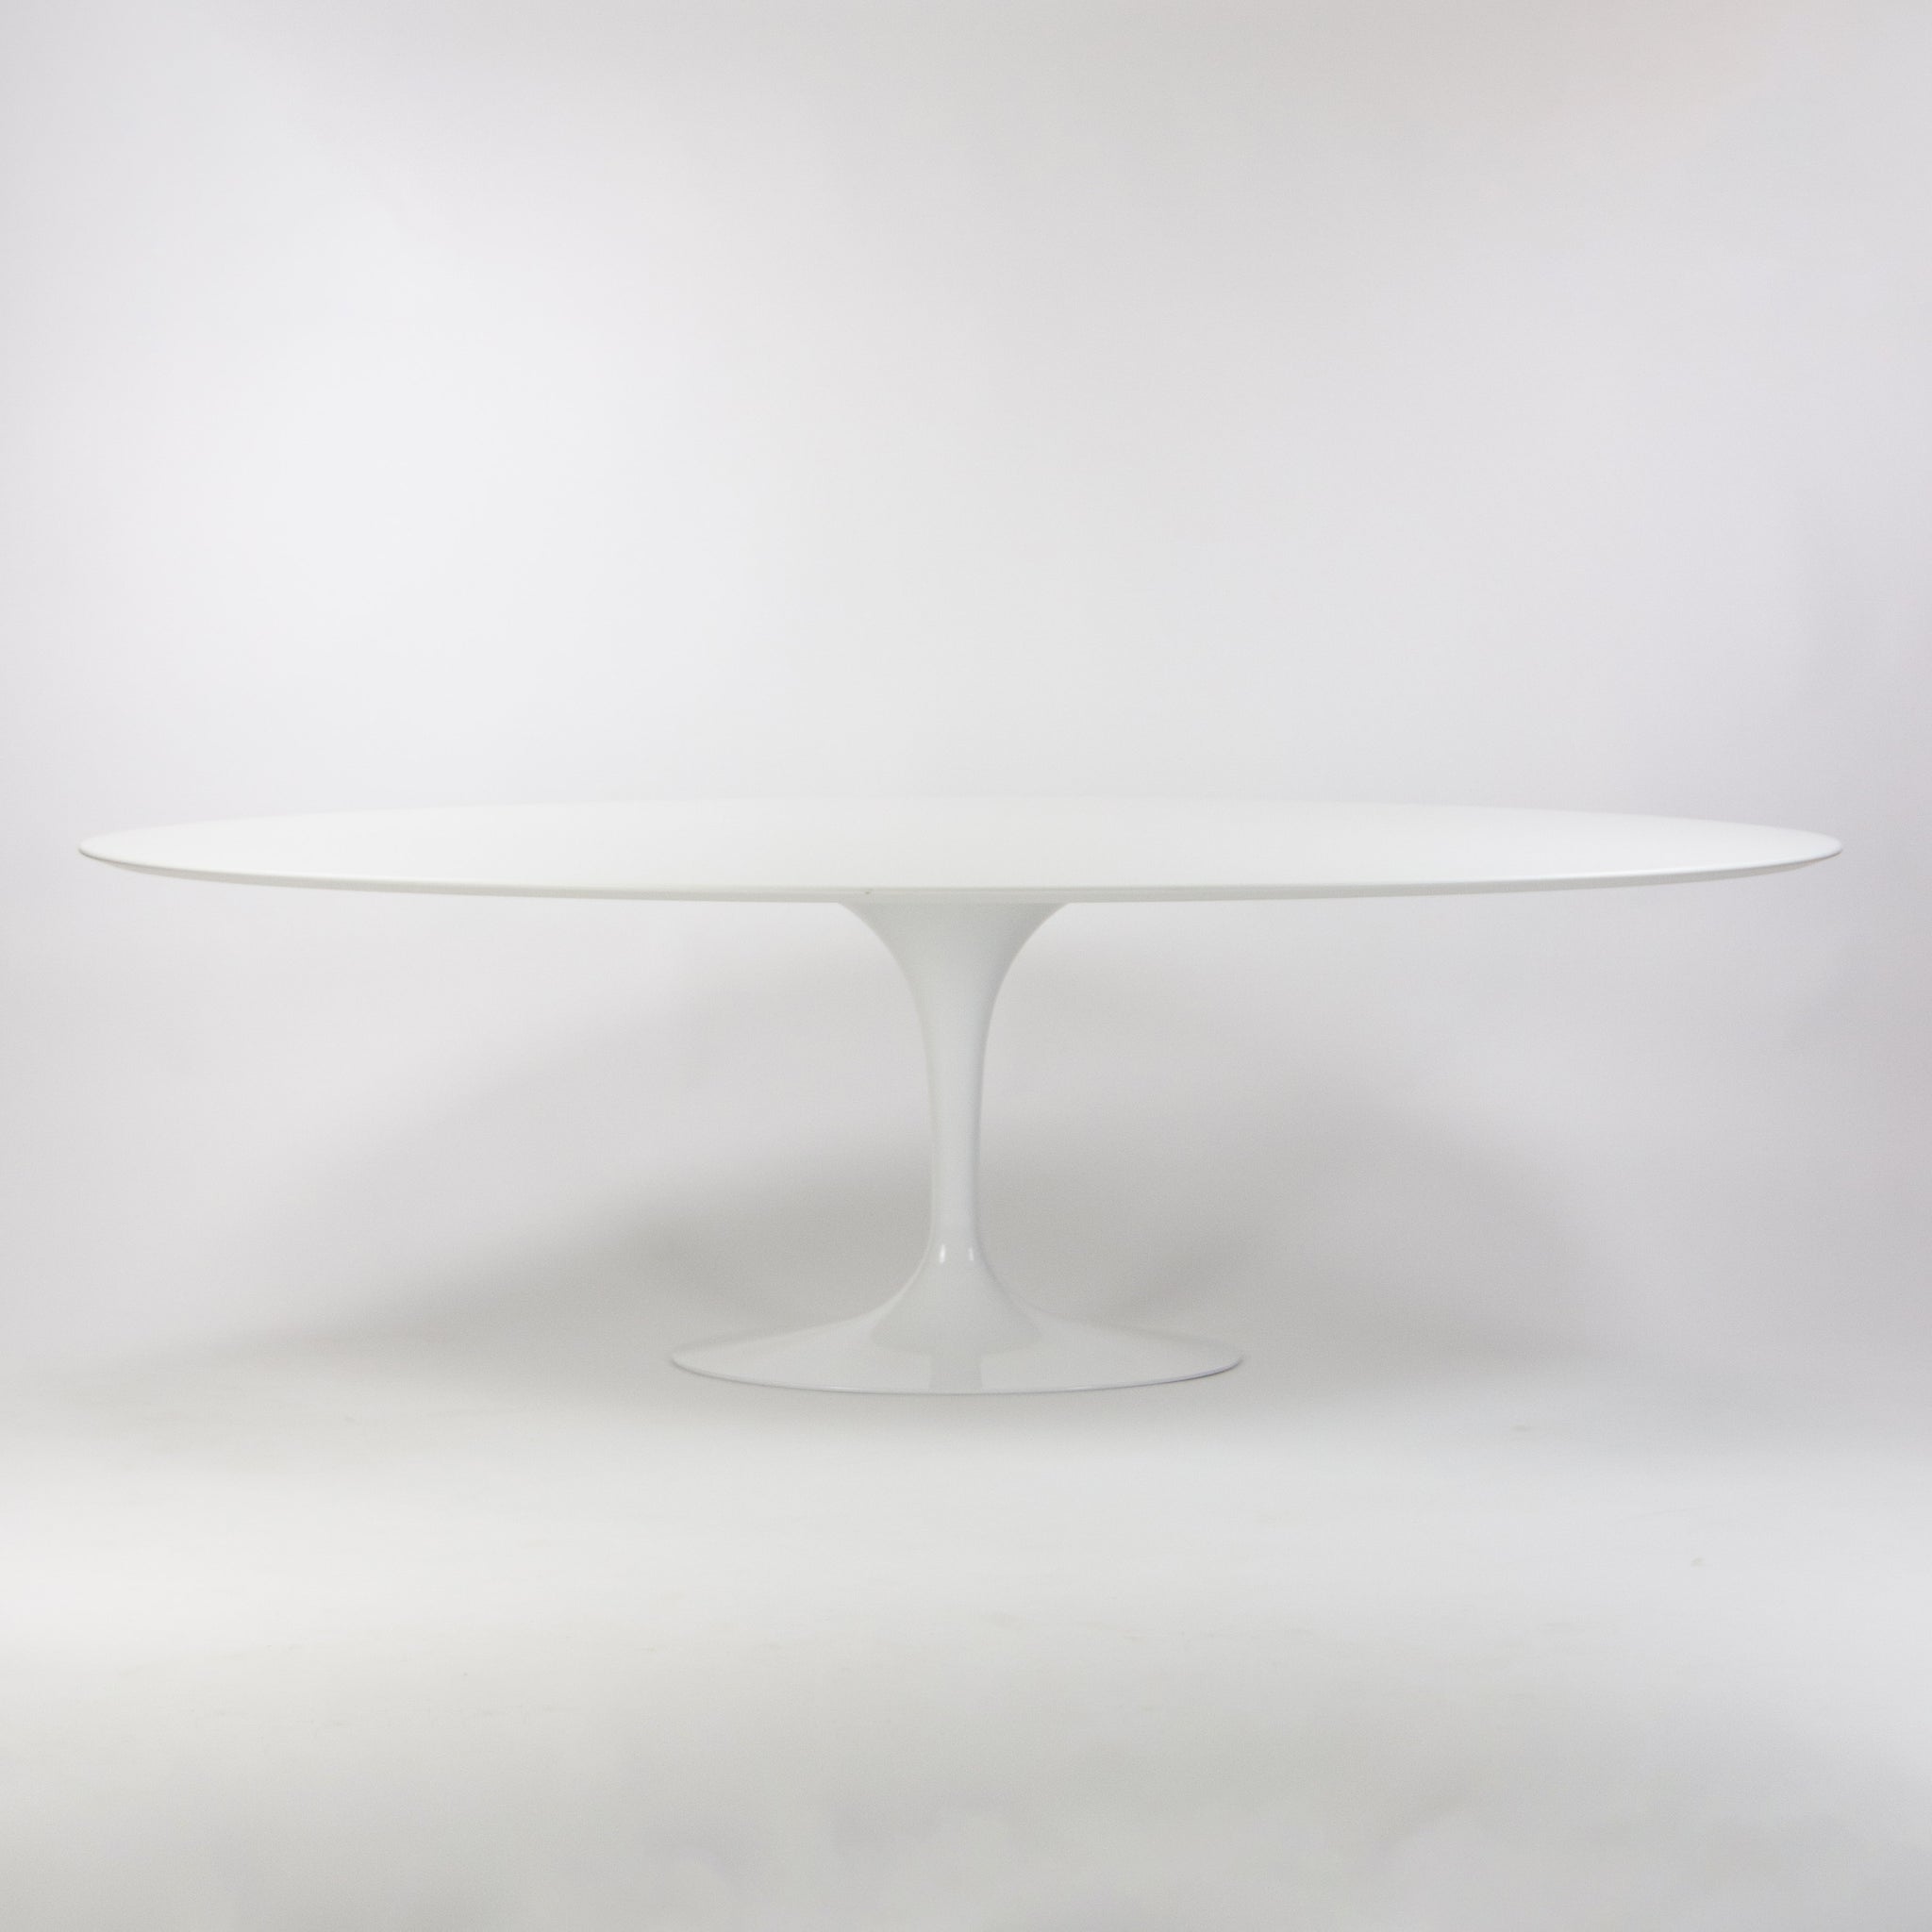 SOLD Eero Saarinen for Knoll 2019 96 inch White Laminate Oval Tulip Dining Table